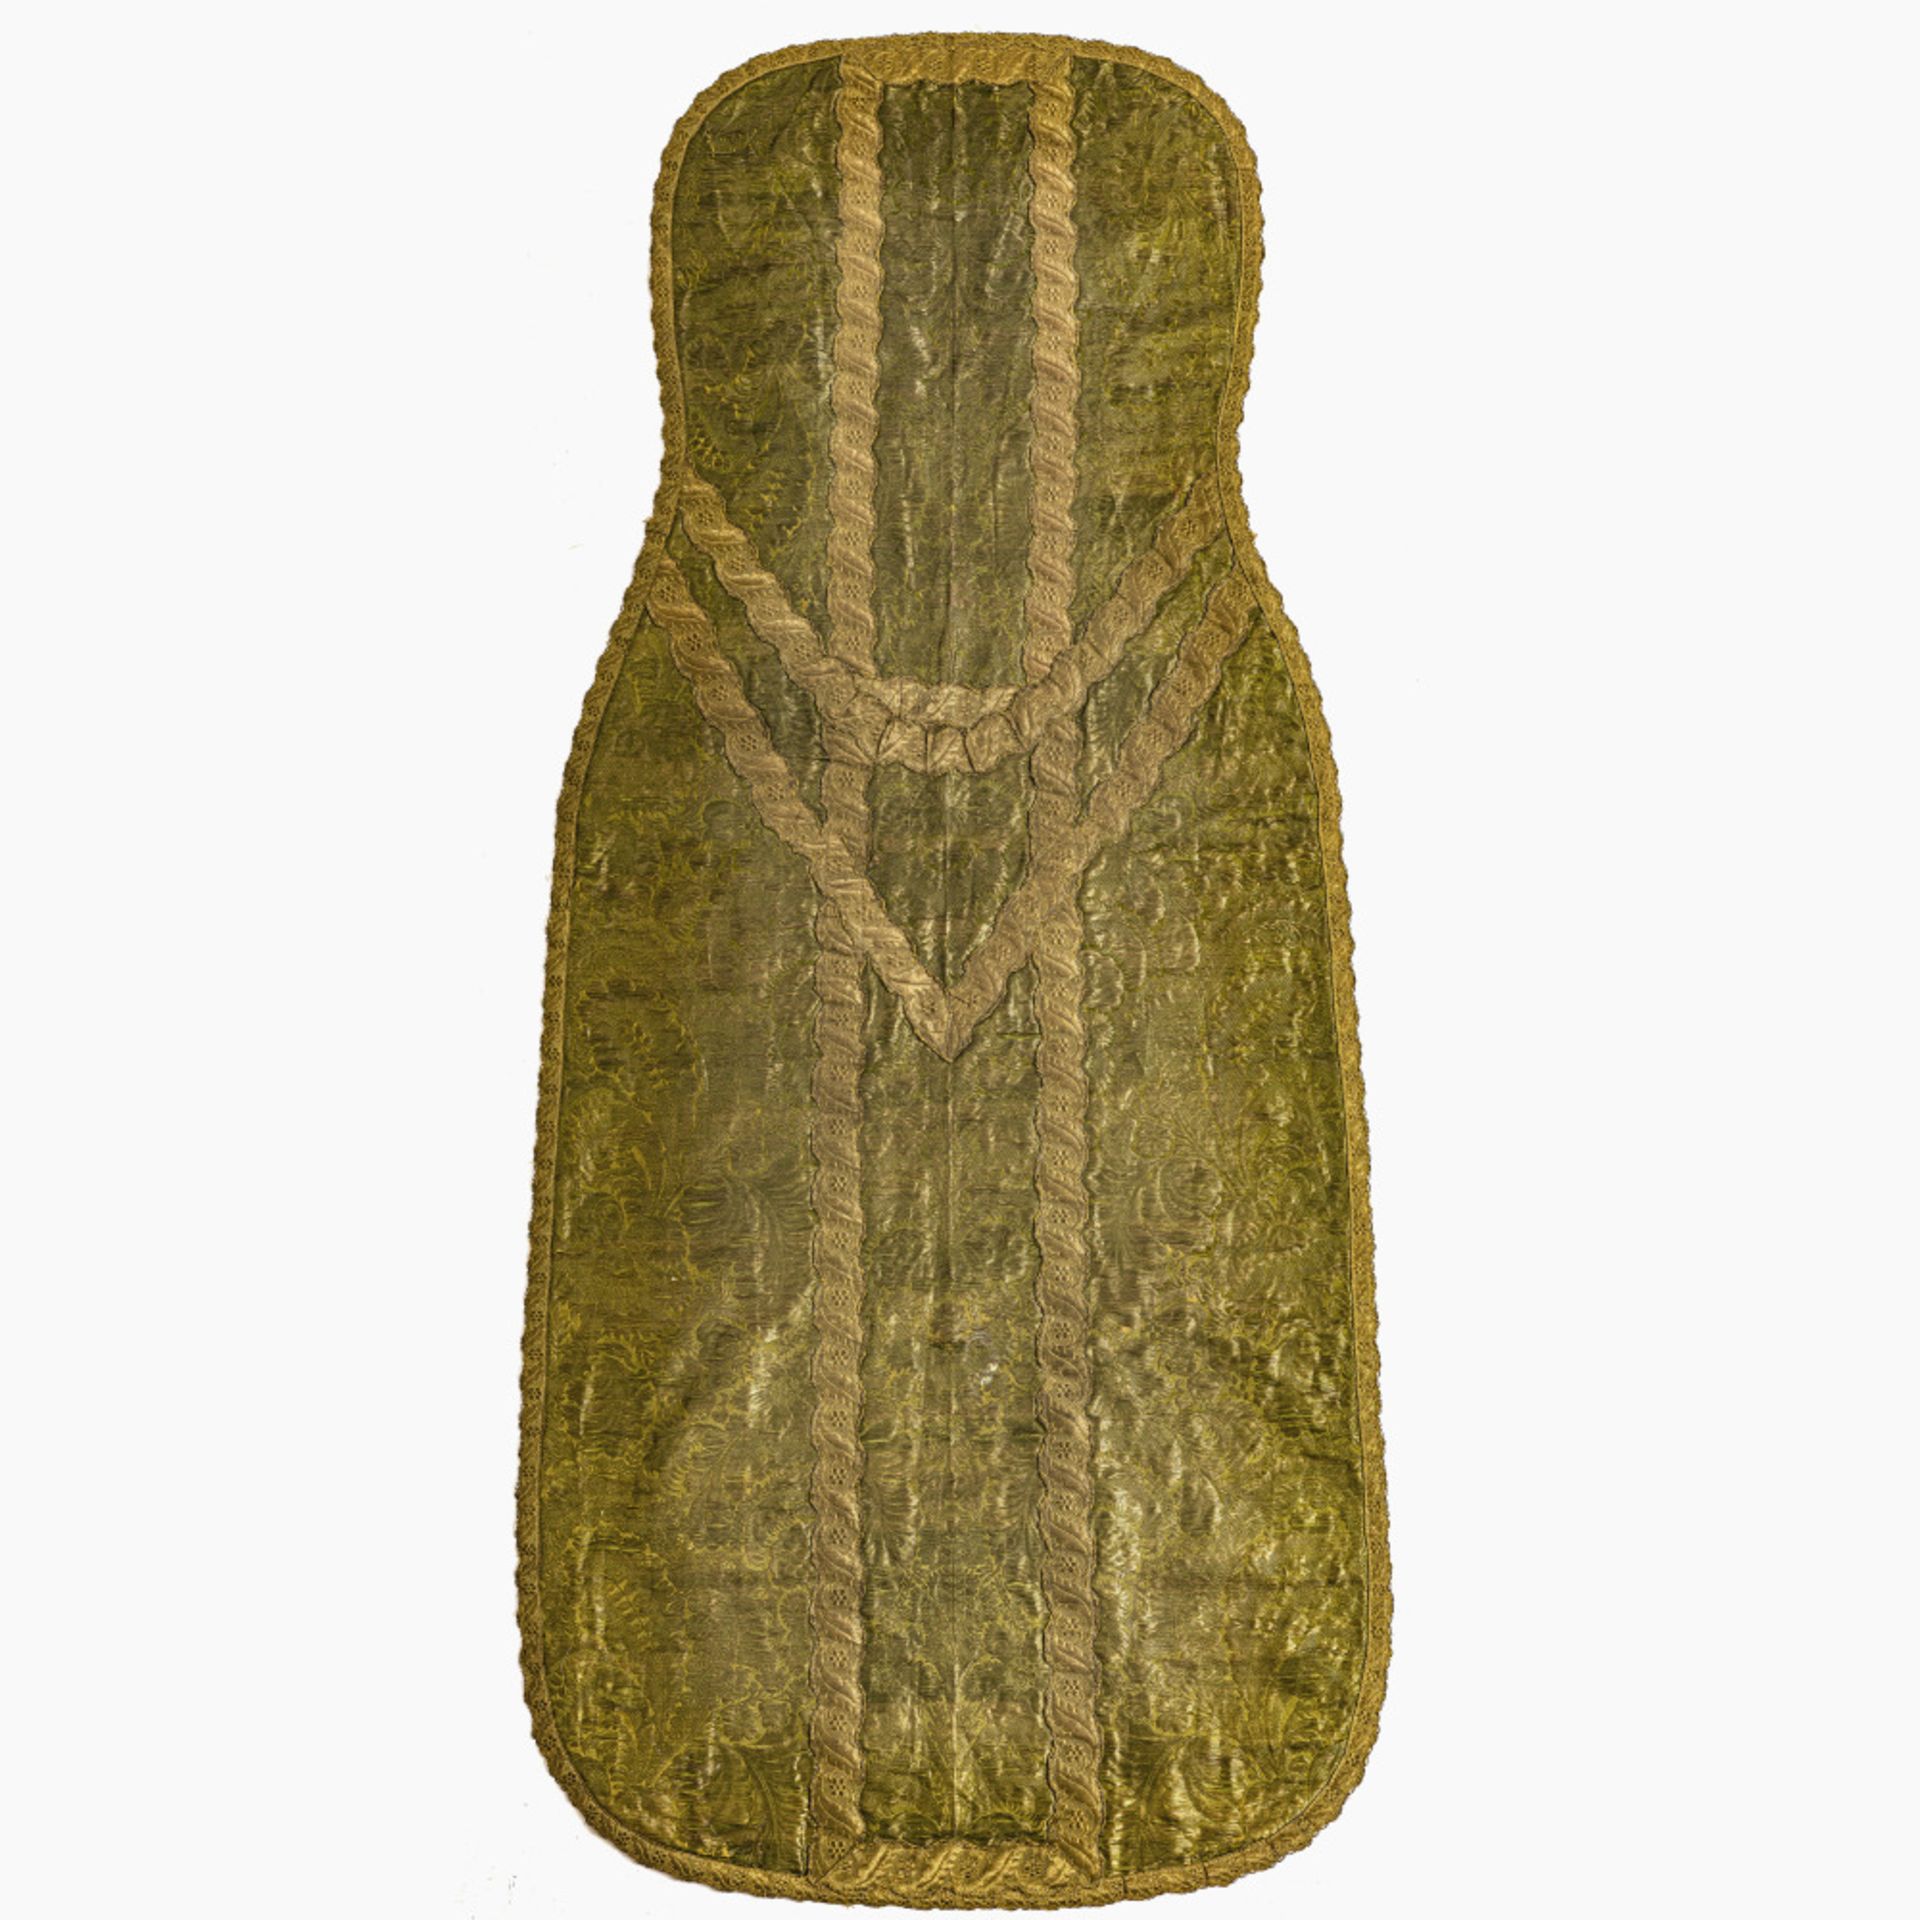 Back part (?) of a chasuble - 18th/19th century